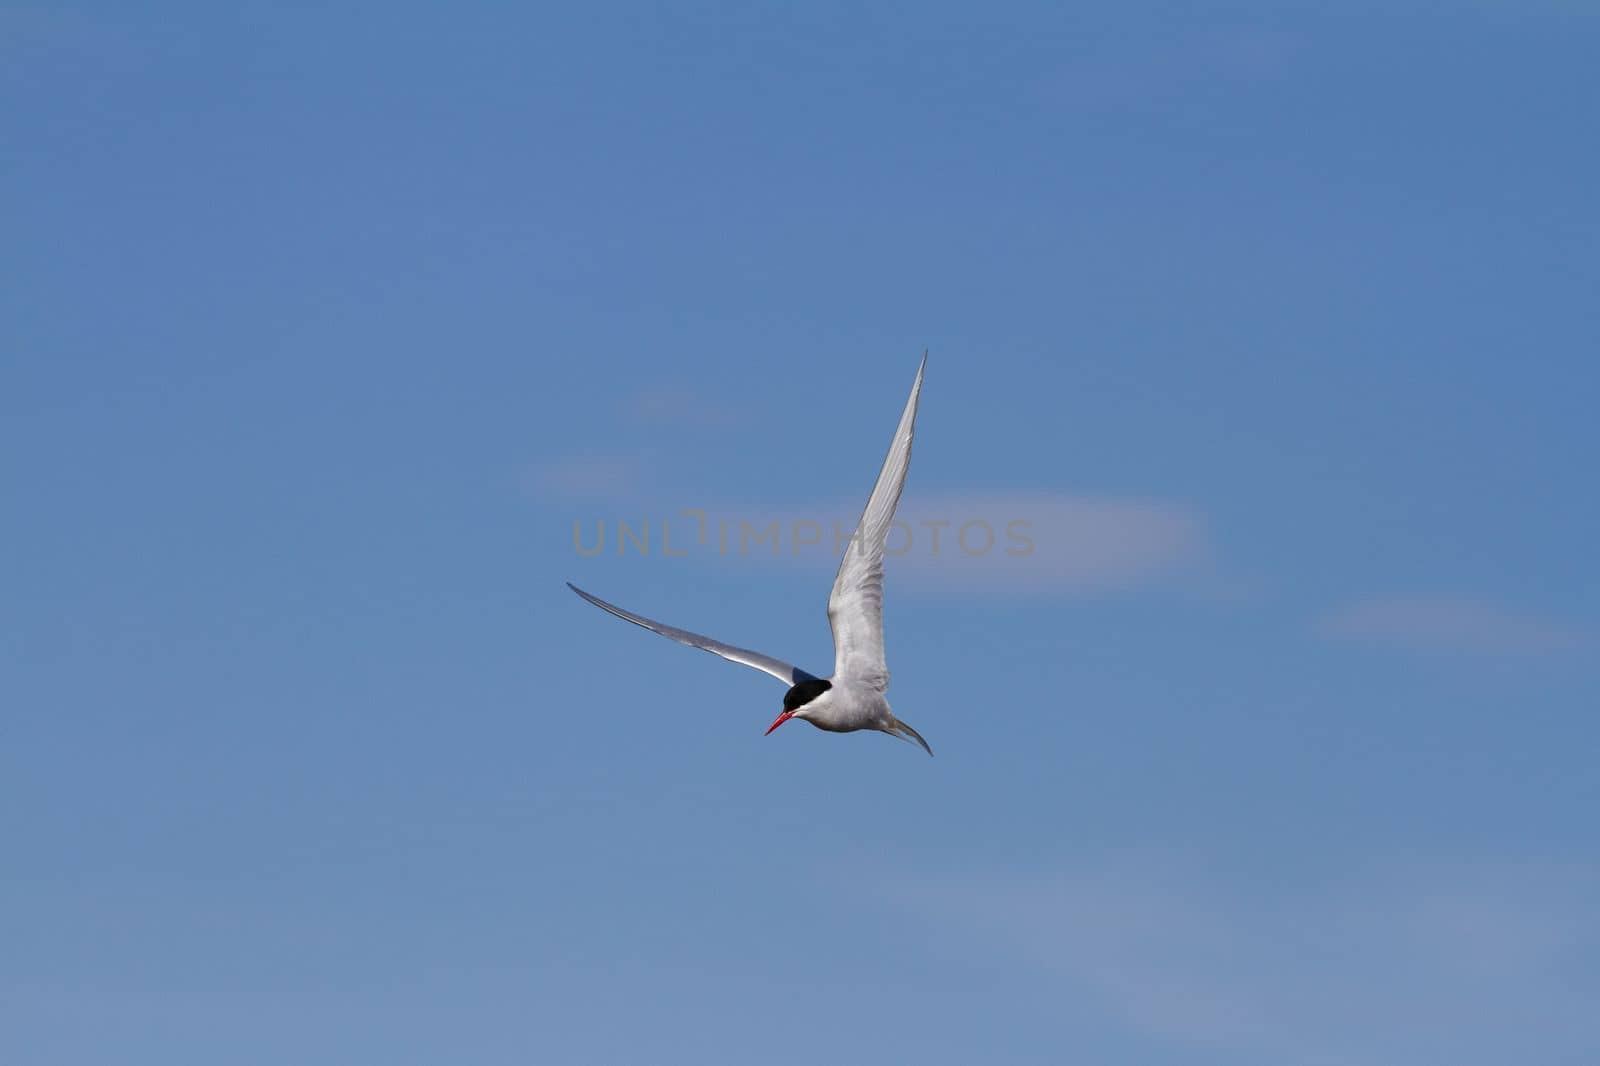 Arctic tern in flight with wings spread out and blue skies in the background by Granchinho